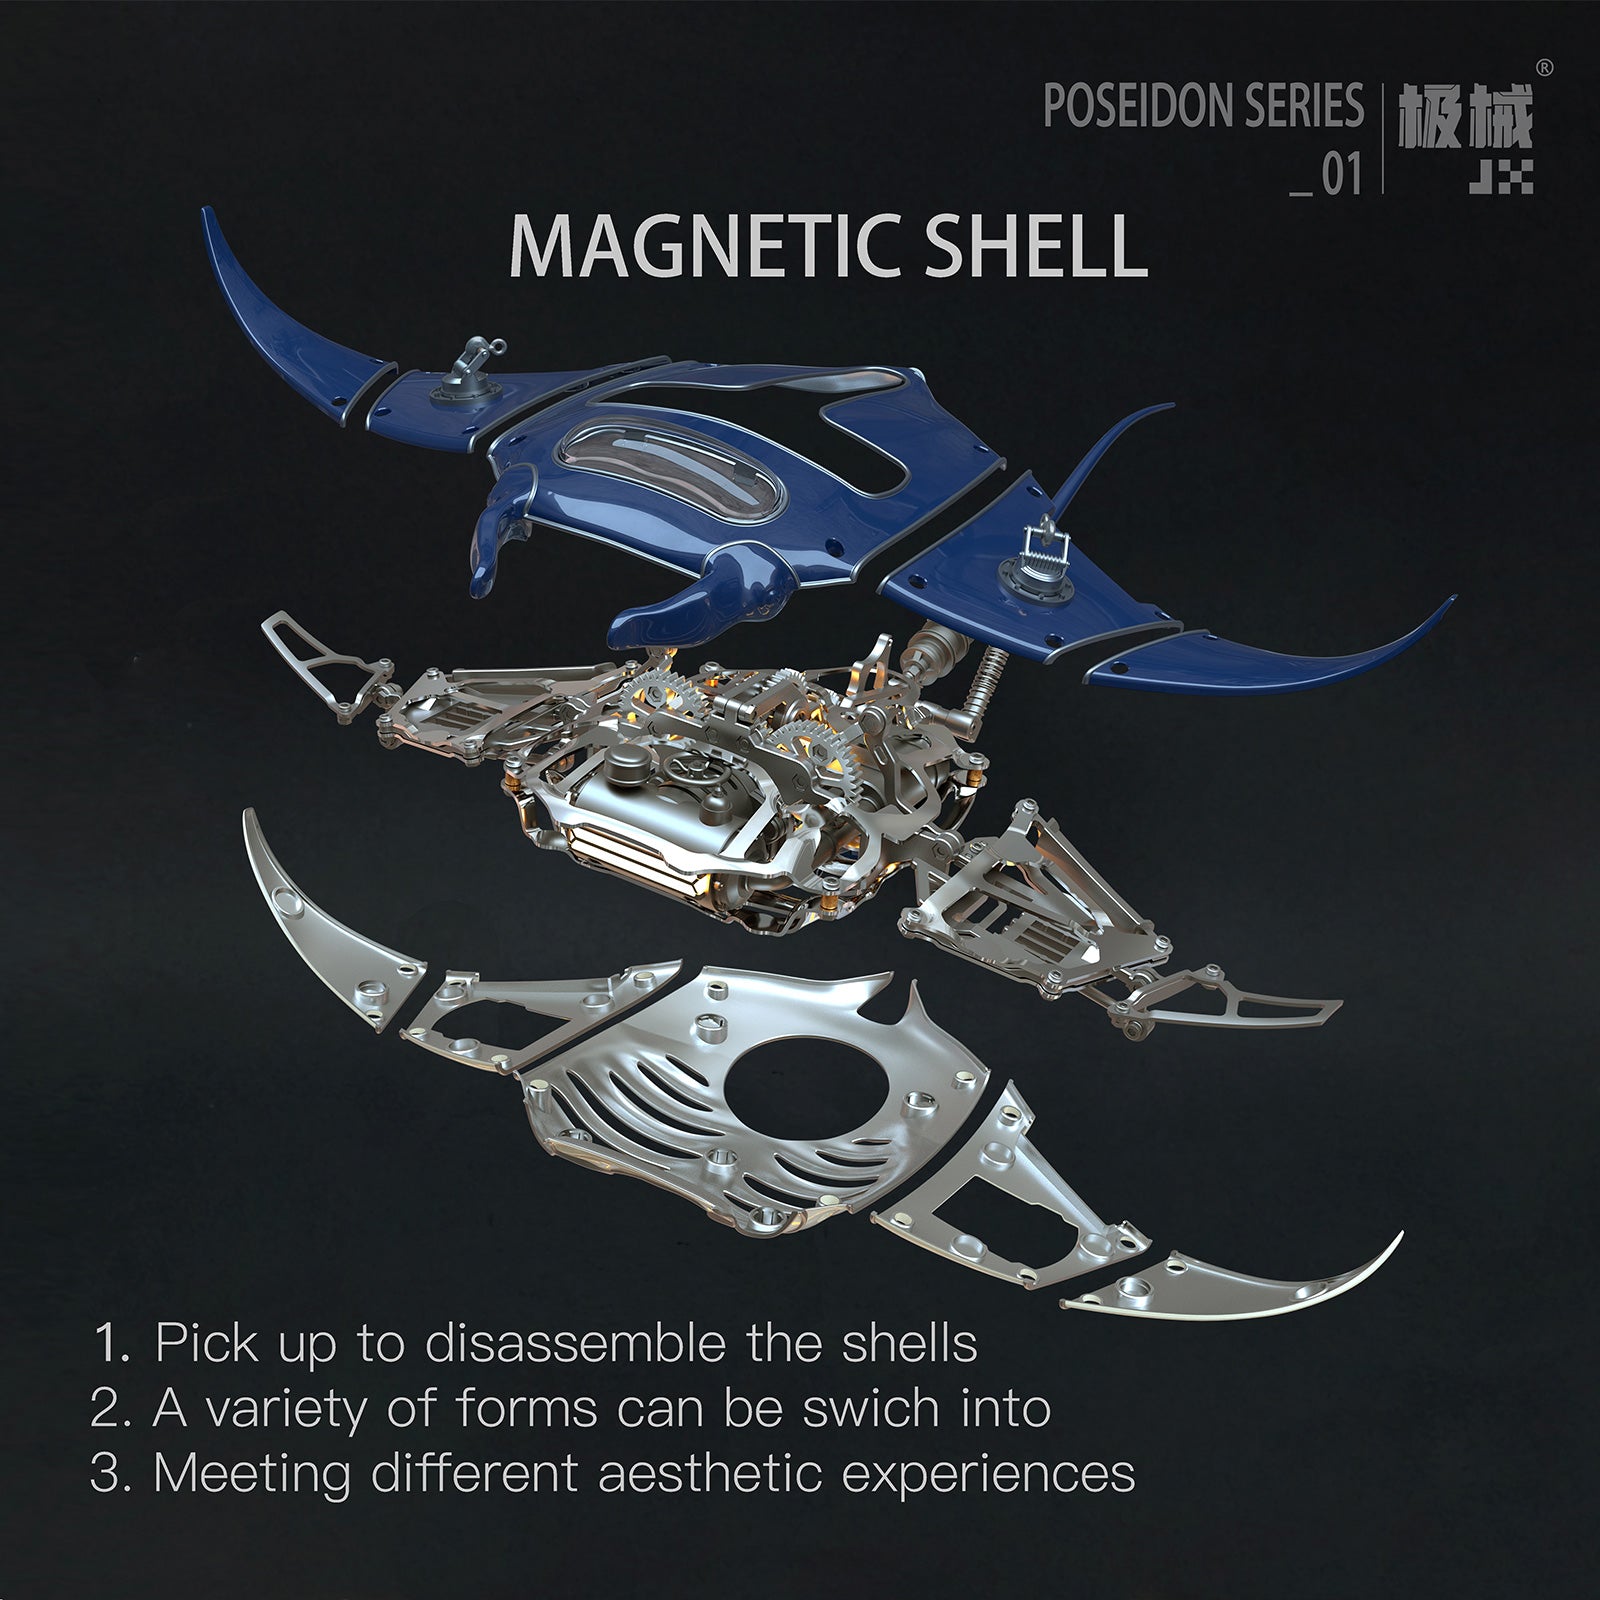 Manta Ray Mechanical Marine Biological 3D Metal Assembly Model with Lights -ENGINEDIY